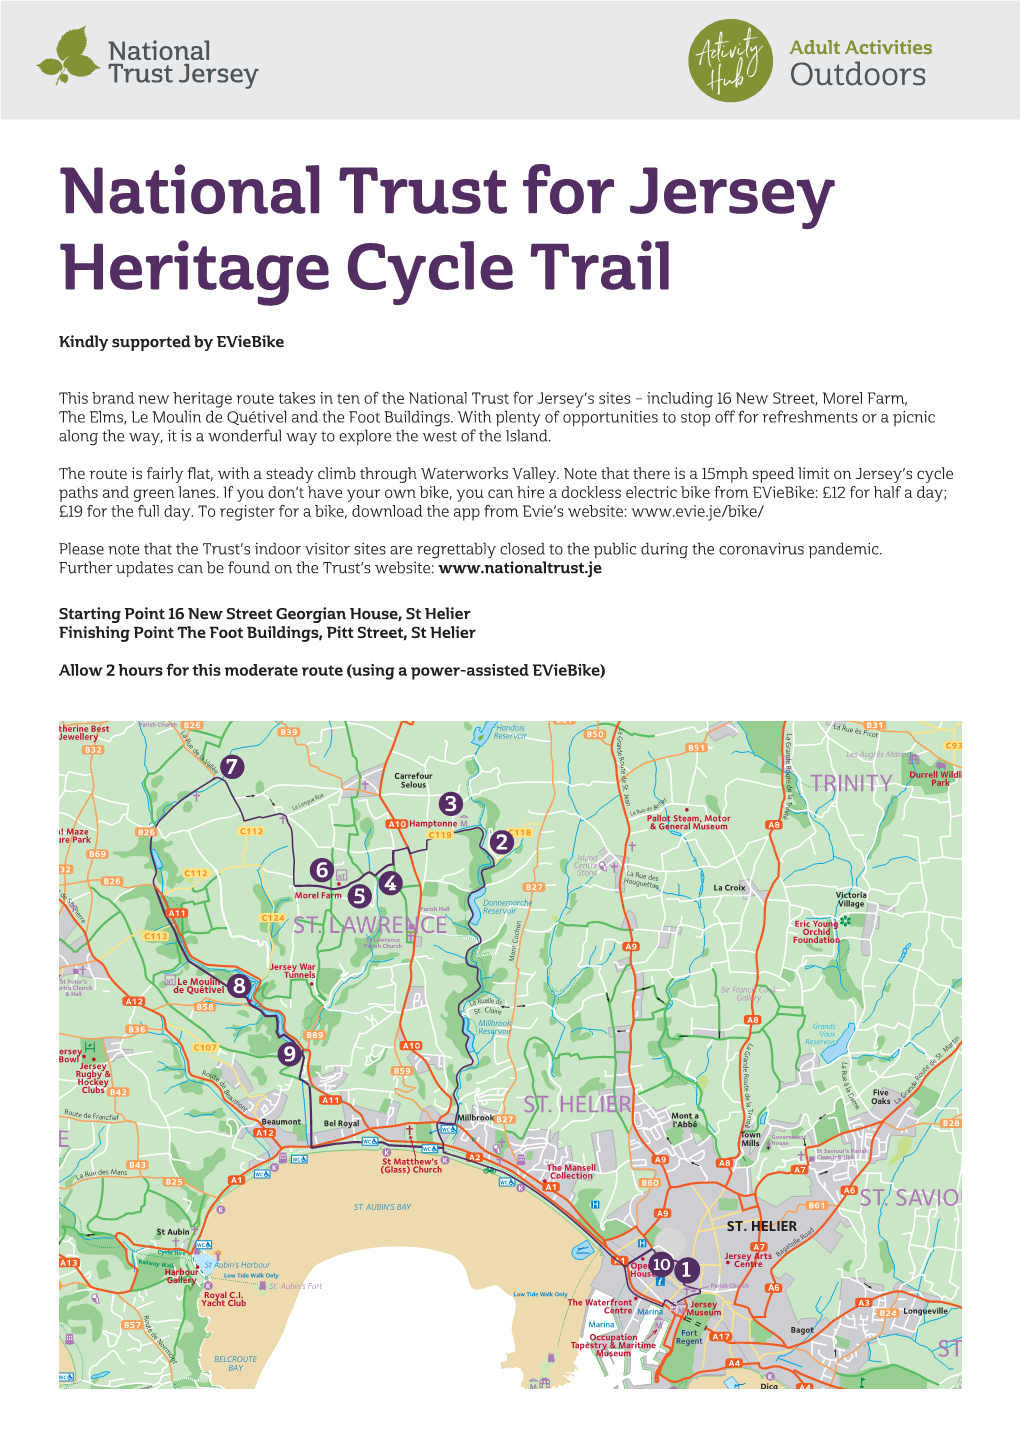 National Trust for Jersey Heritage Cycle Trail